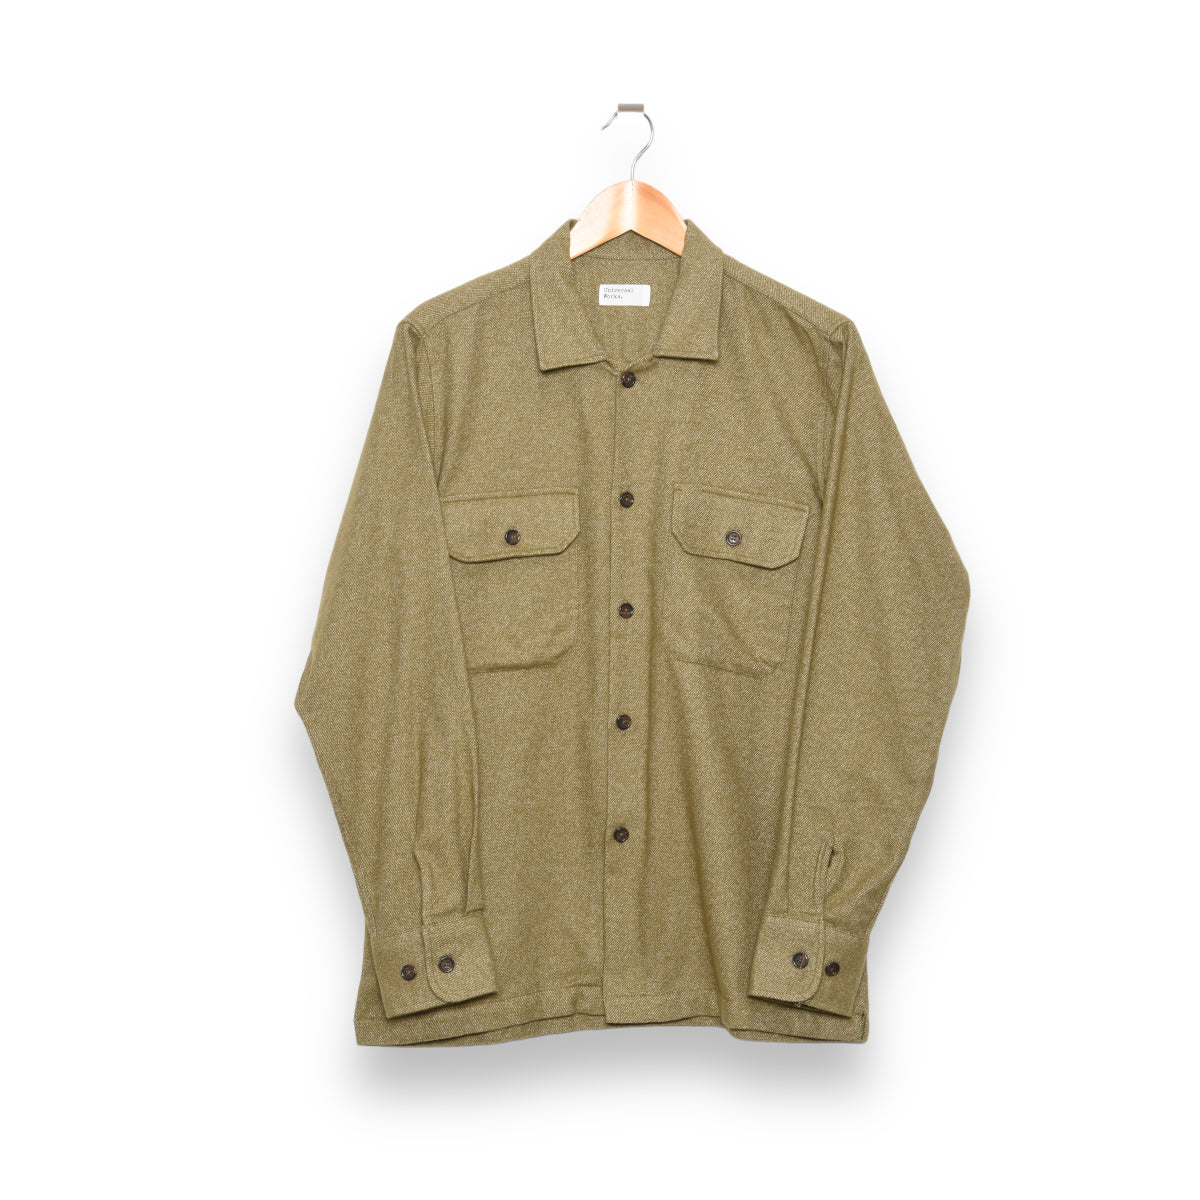 Universal Works L/S Utility Shirt 29730 Soft Flannel Cotton olive